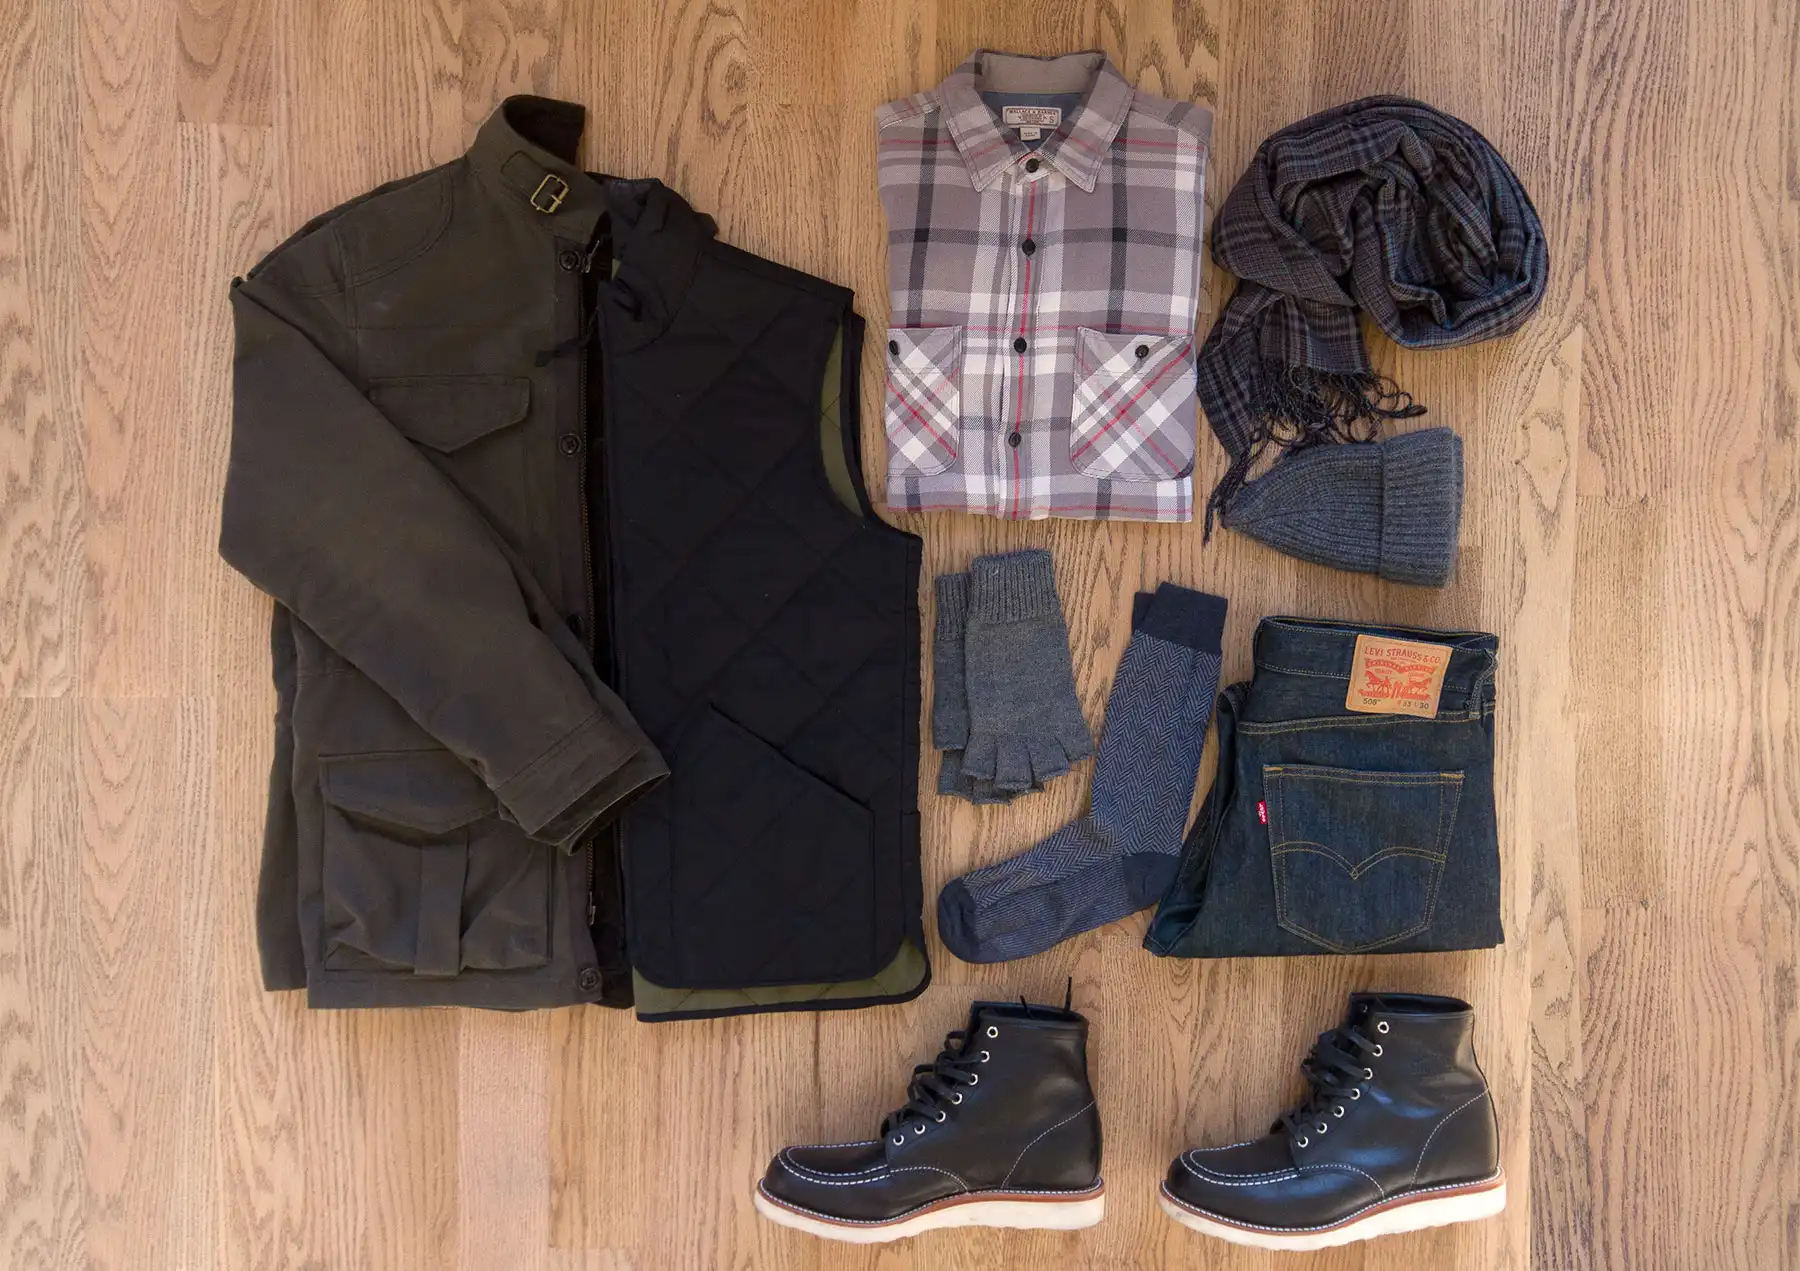 Men's Clothing and Accessories on eBay